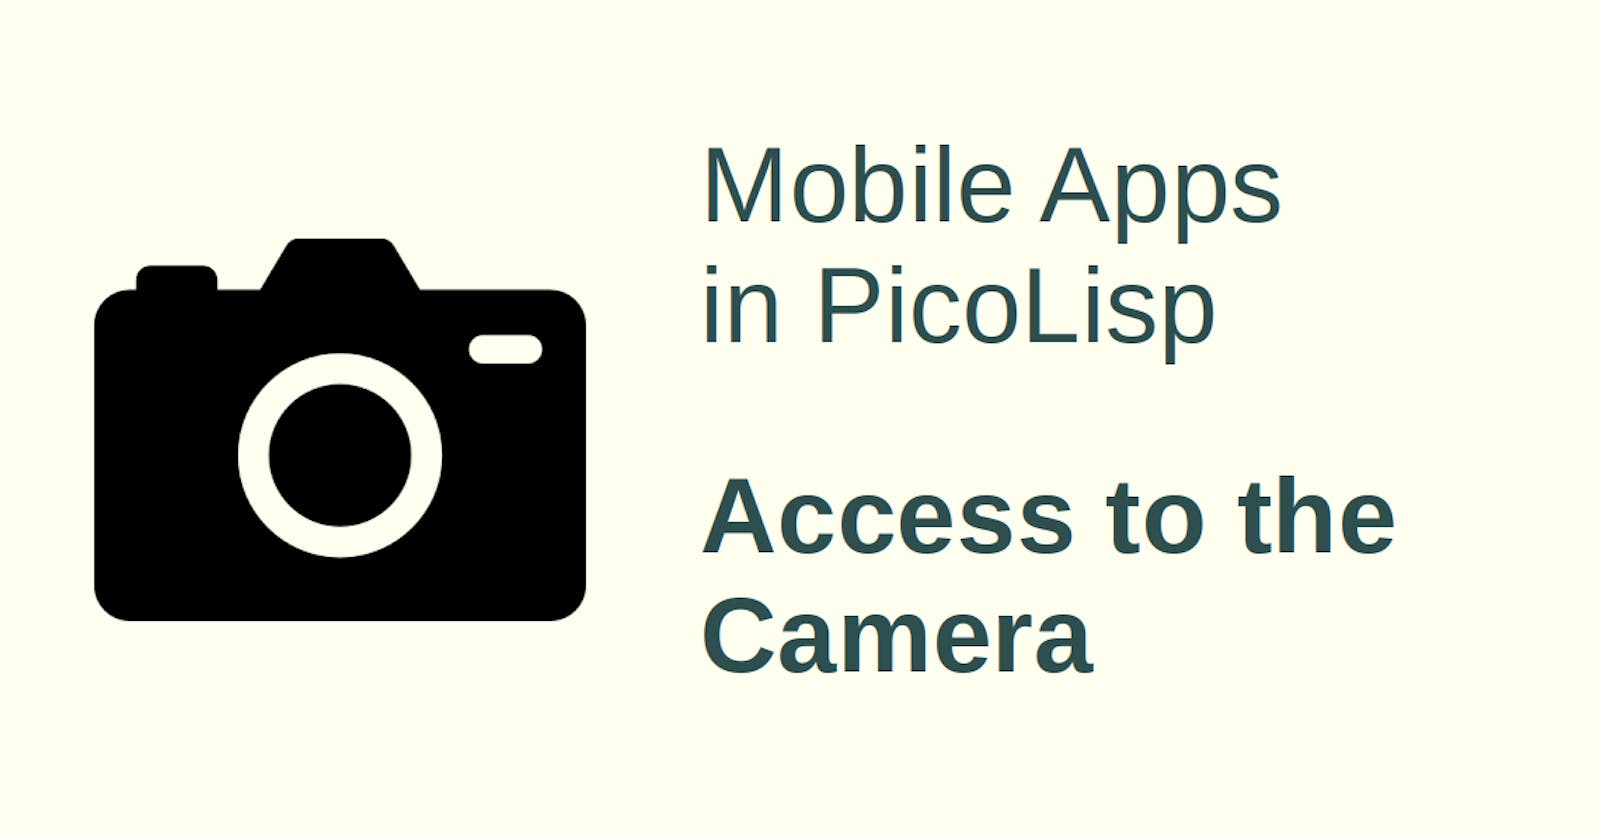 A Camera Android App written in PicoLisp (Pt. 2)